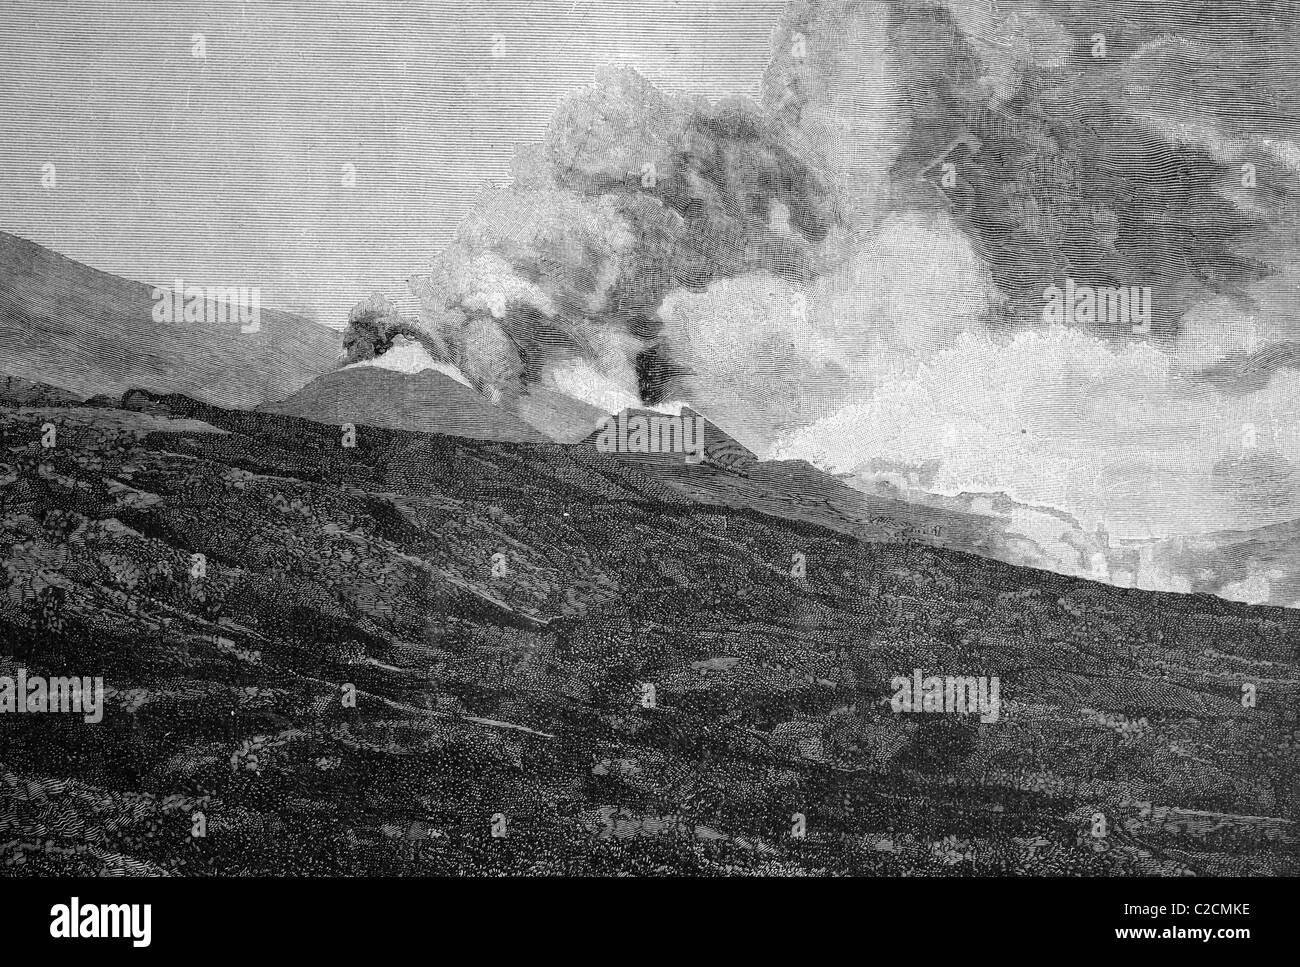 Mount etna Black and White Stock Photos & Images - Alamy